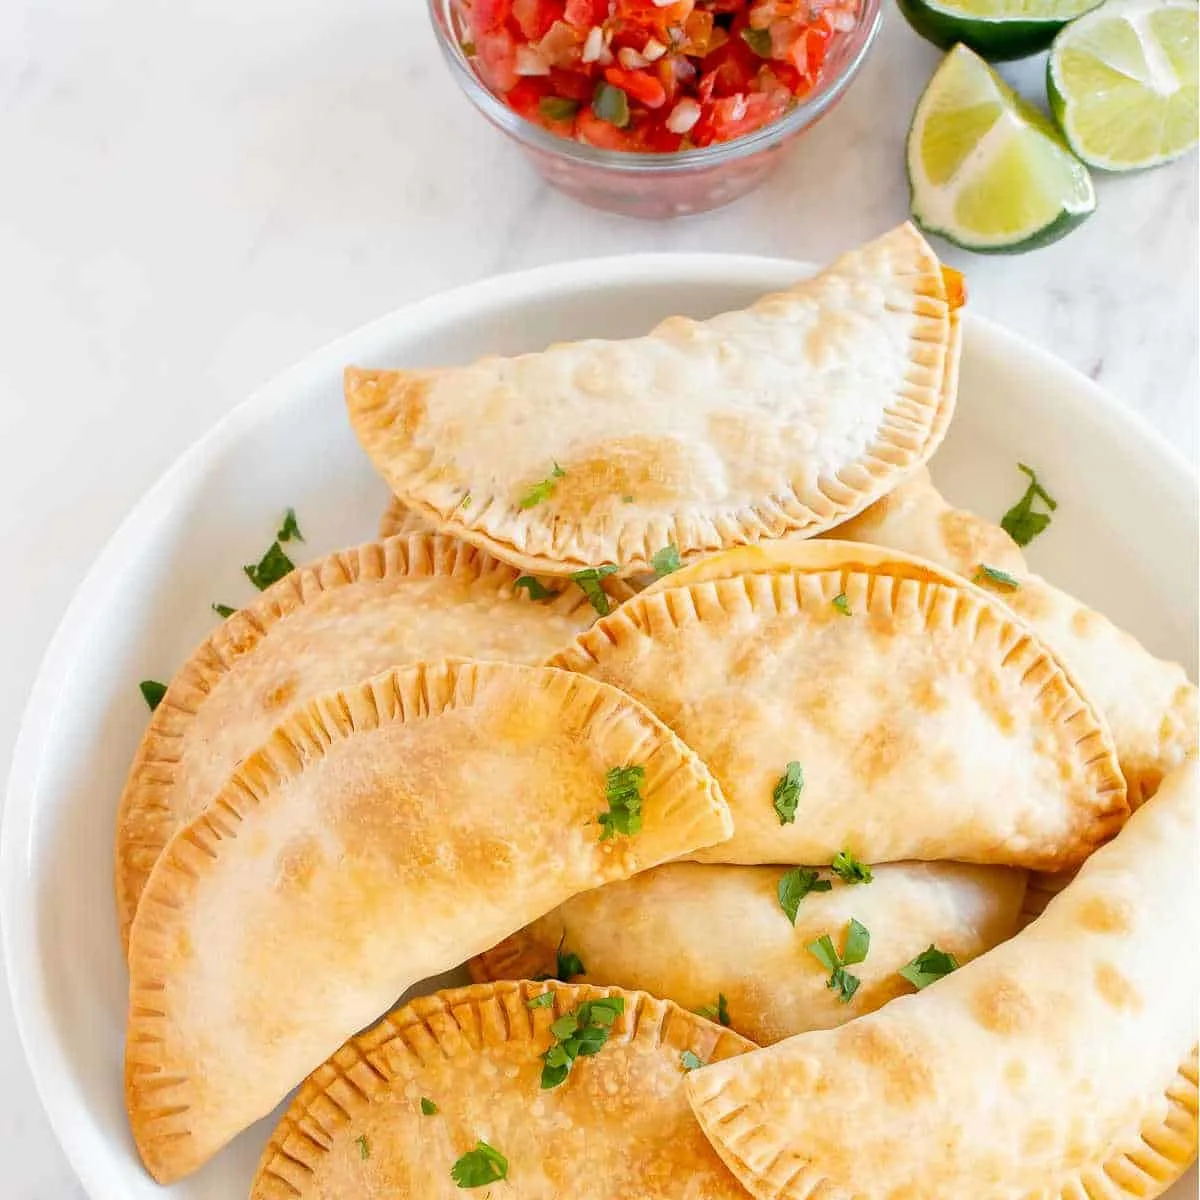 plate of corn empanadas with limes and salsa